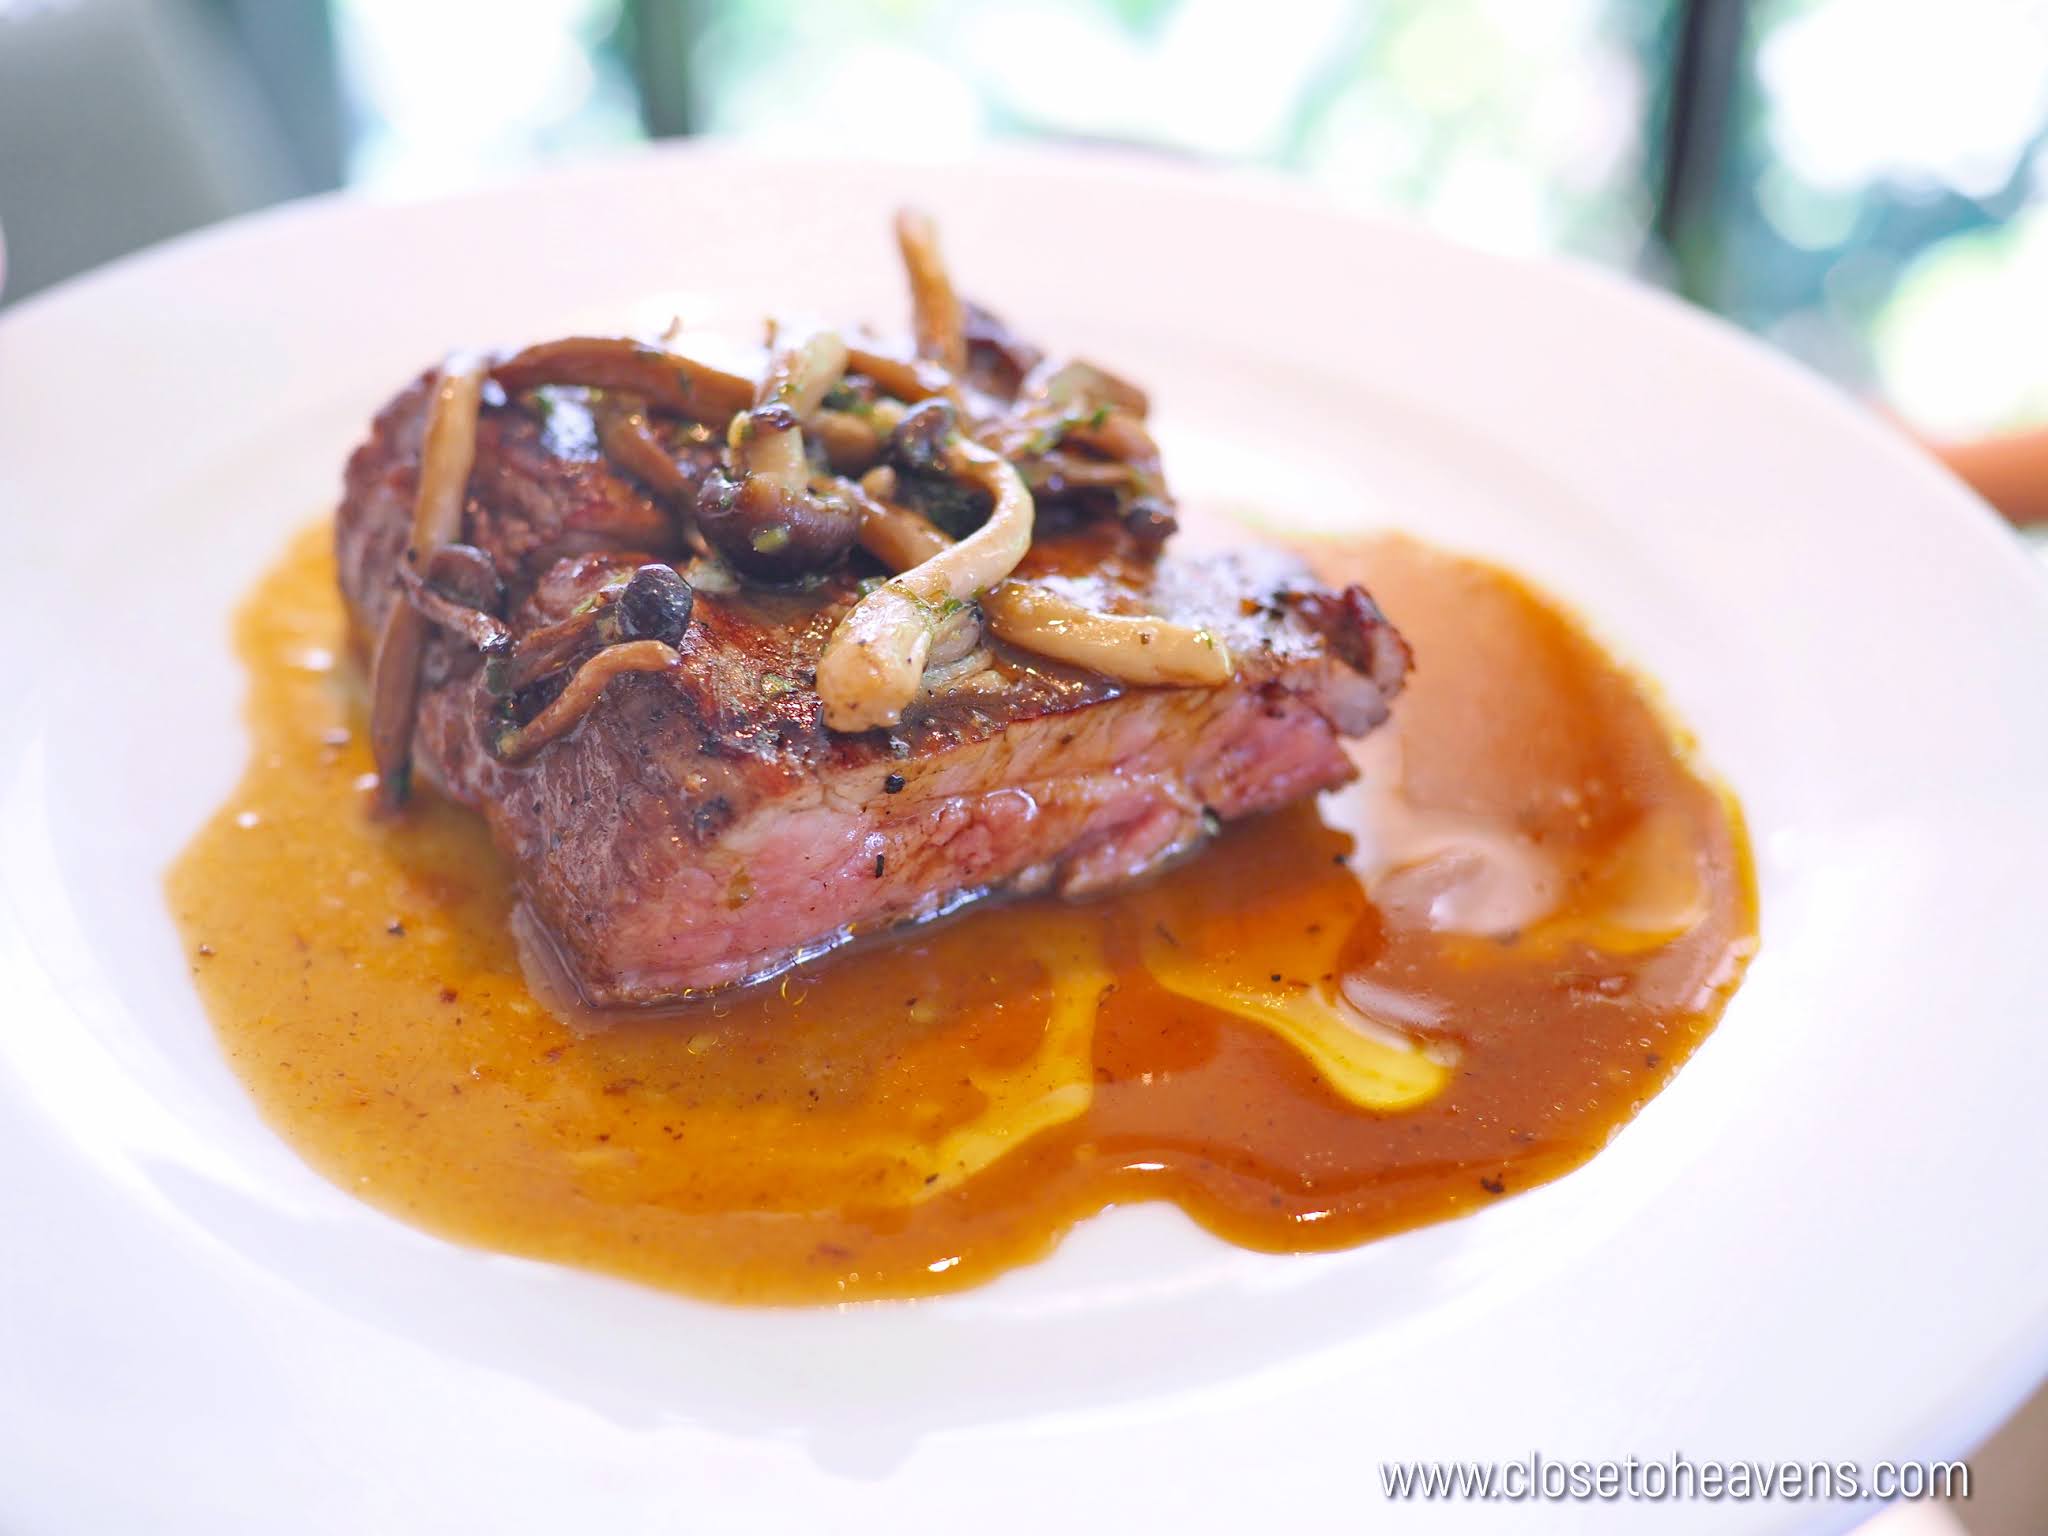 GRILLED AUSTRALIAN BEEF FLANK STEAK WITHRED WINE SAUCE